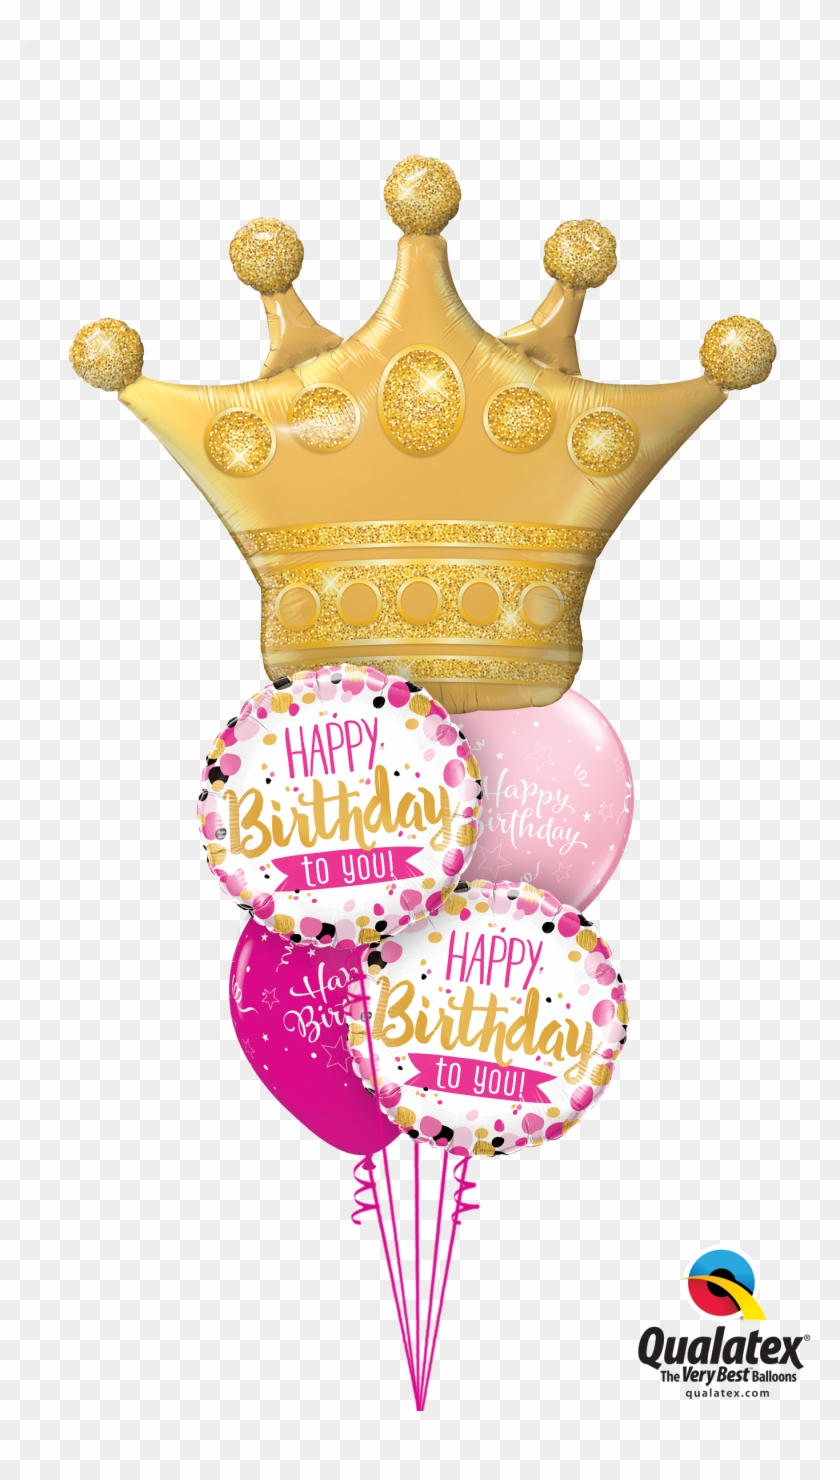 HAPPY BIRTHDAY BEAUTIFUL QUEEN  Keep Calm and Posters Generator Maker For  Free  KeepCalmAndPosterscom